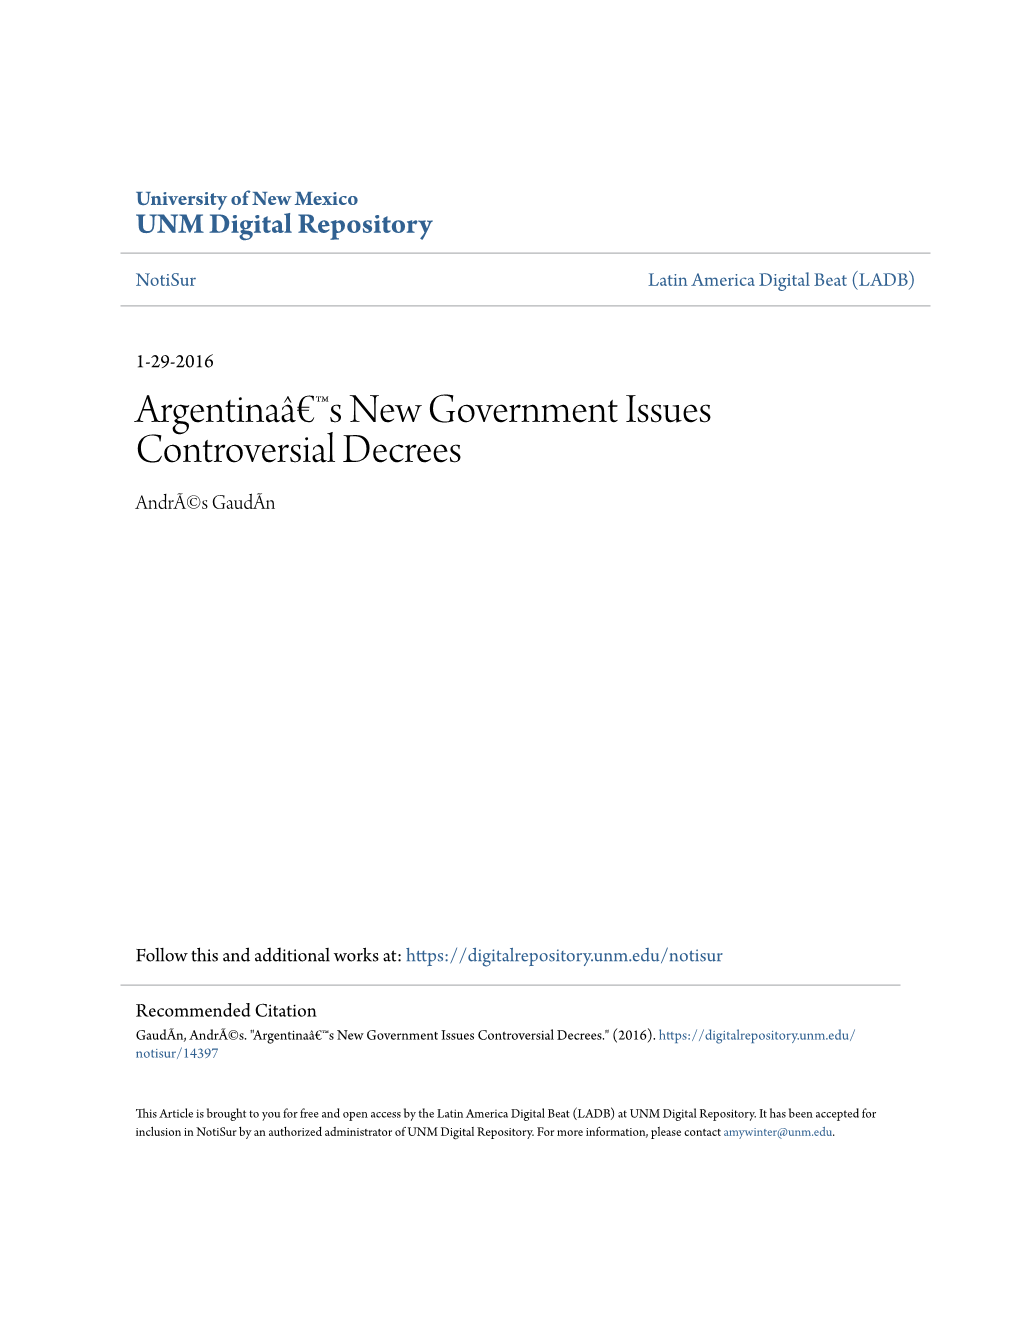 Argentinaâ€™S New Government Issues Controversial Decrees Andrã©S Gaudãn